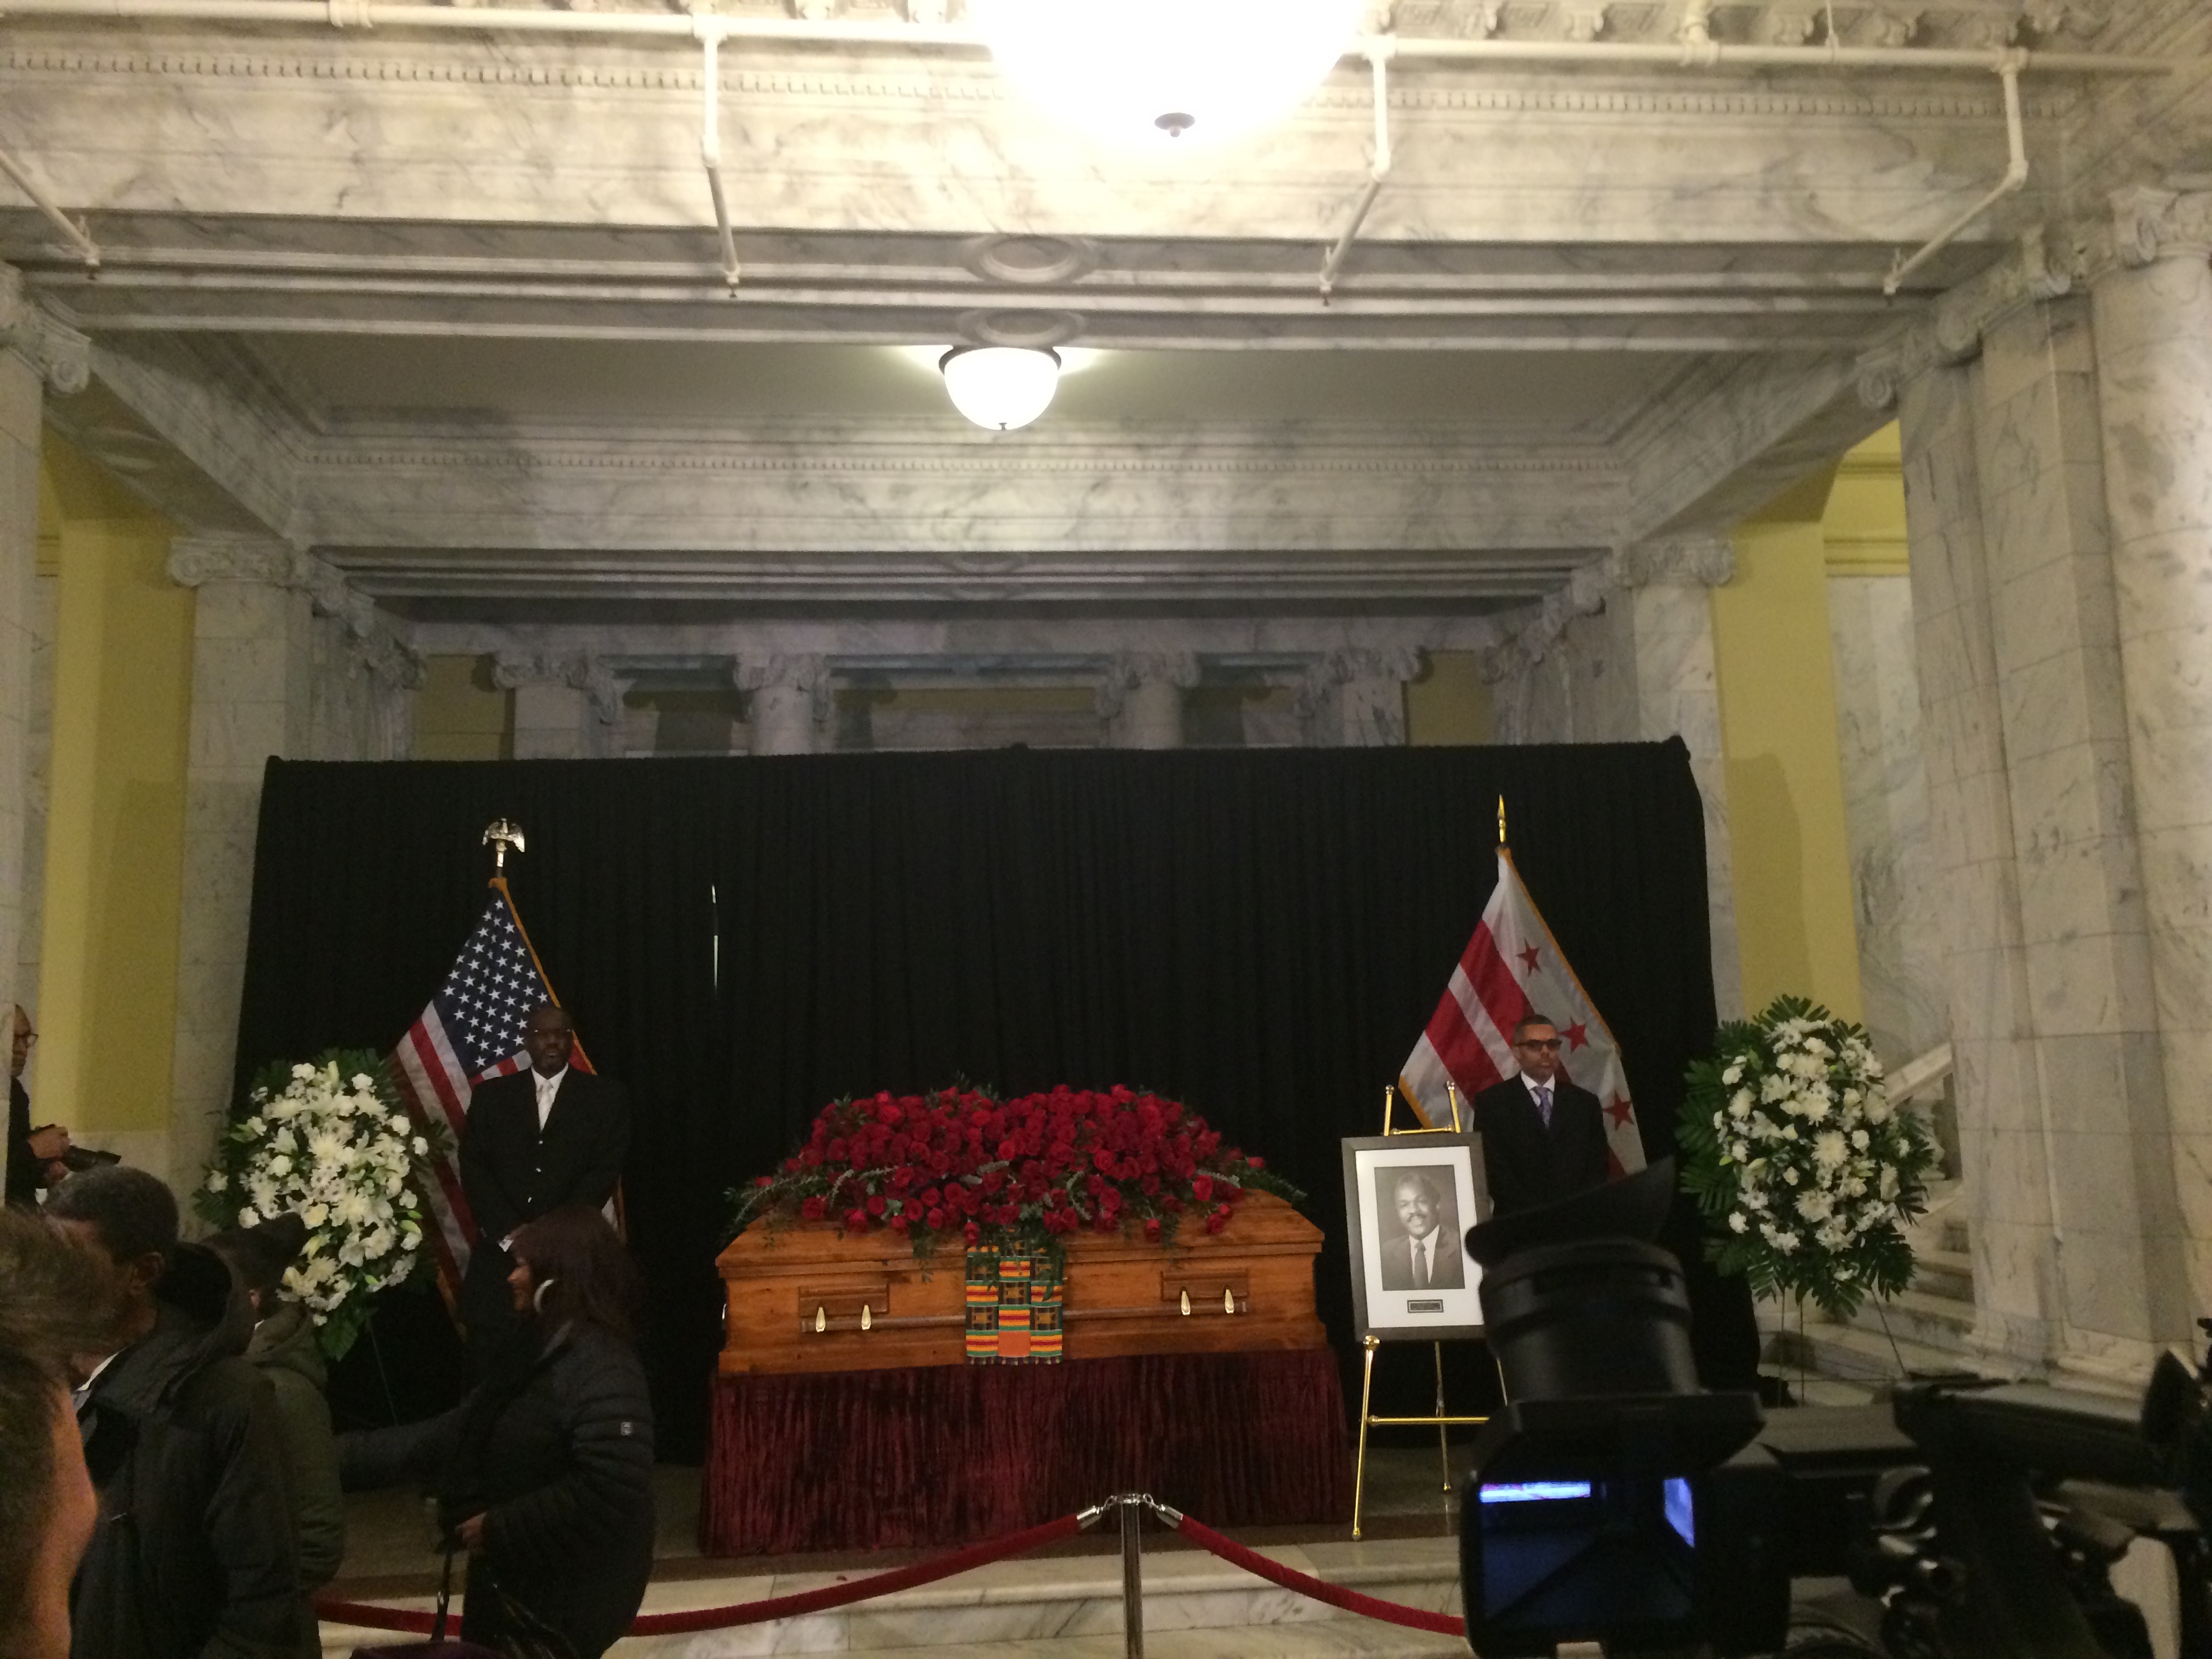 Memorial services for Marion Barry begin